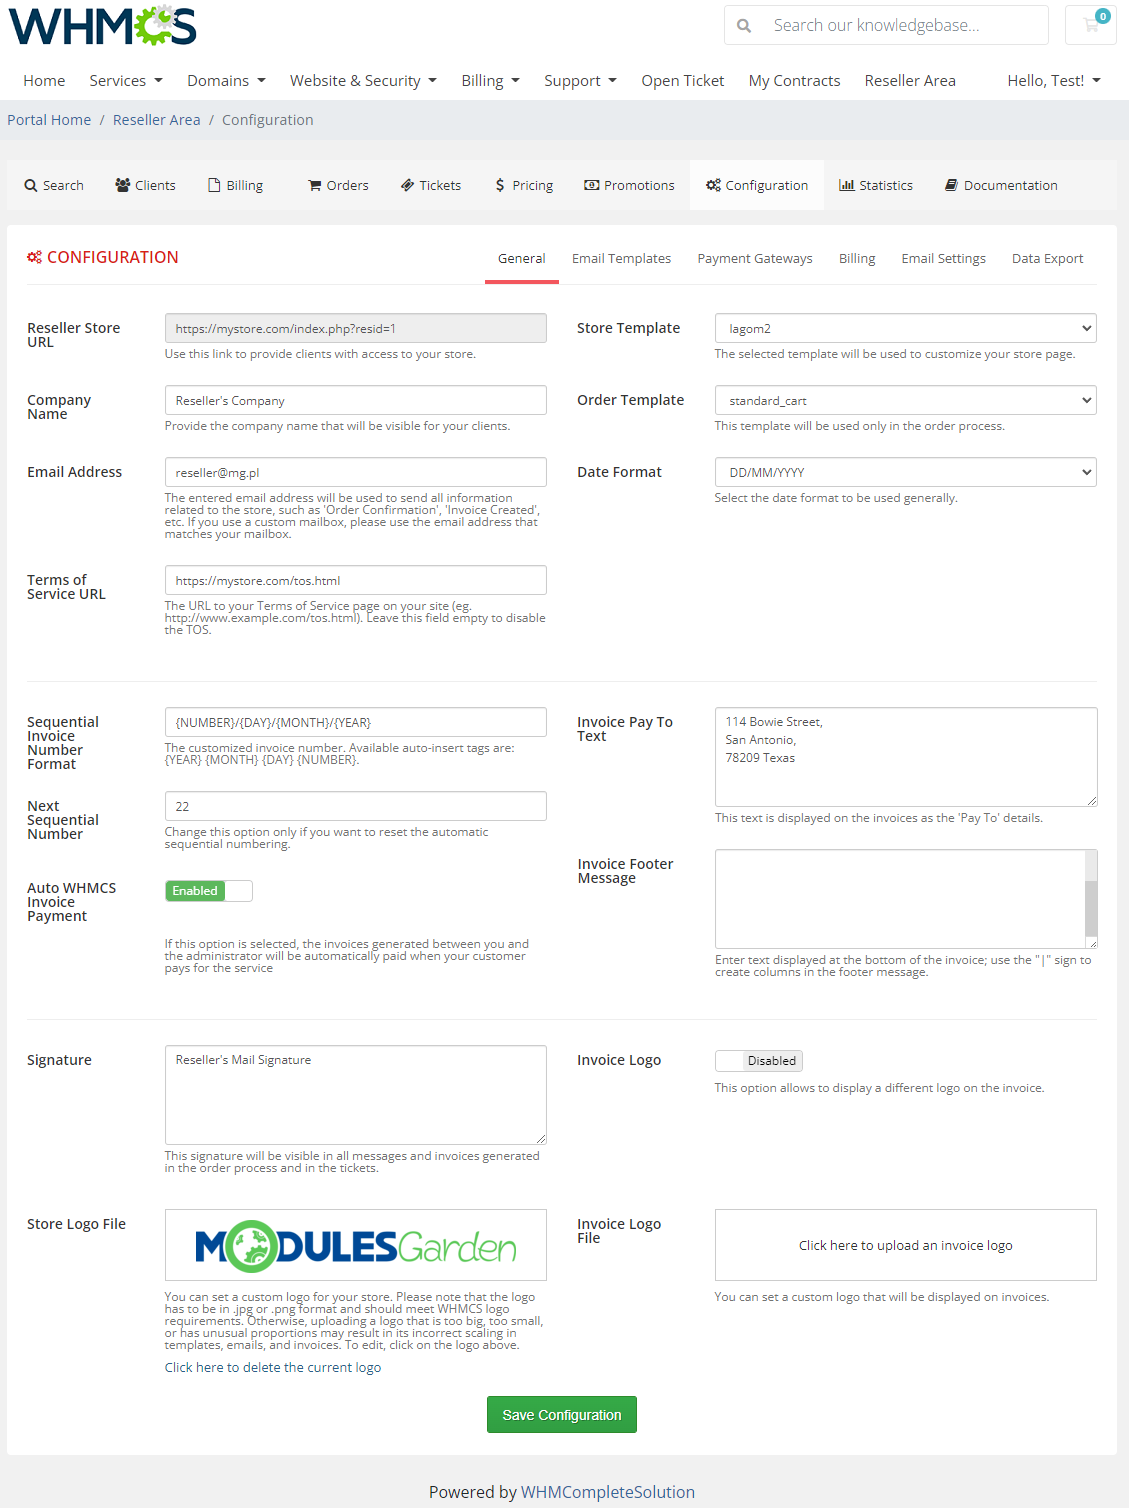 Resellers Center For WHMCS: Module Screenshot 35